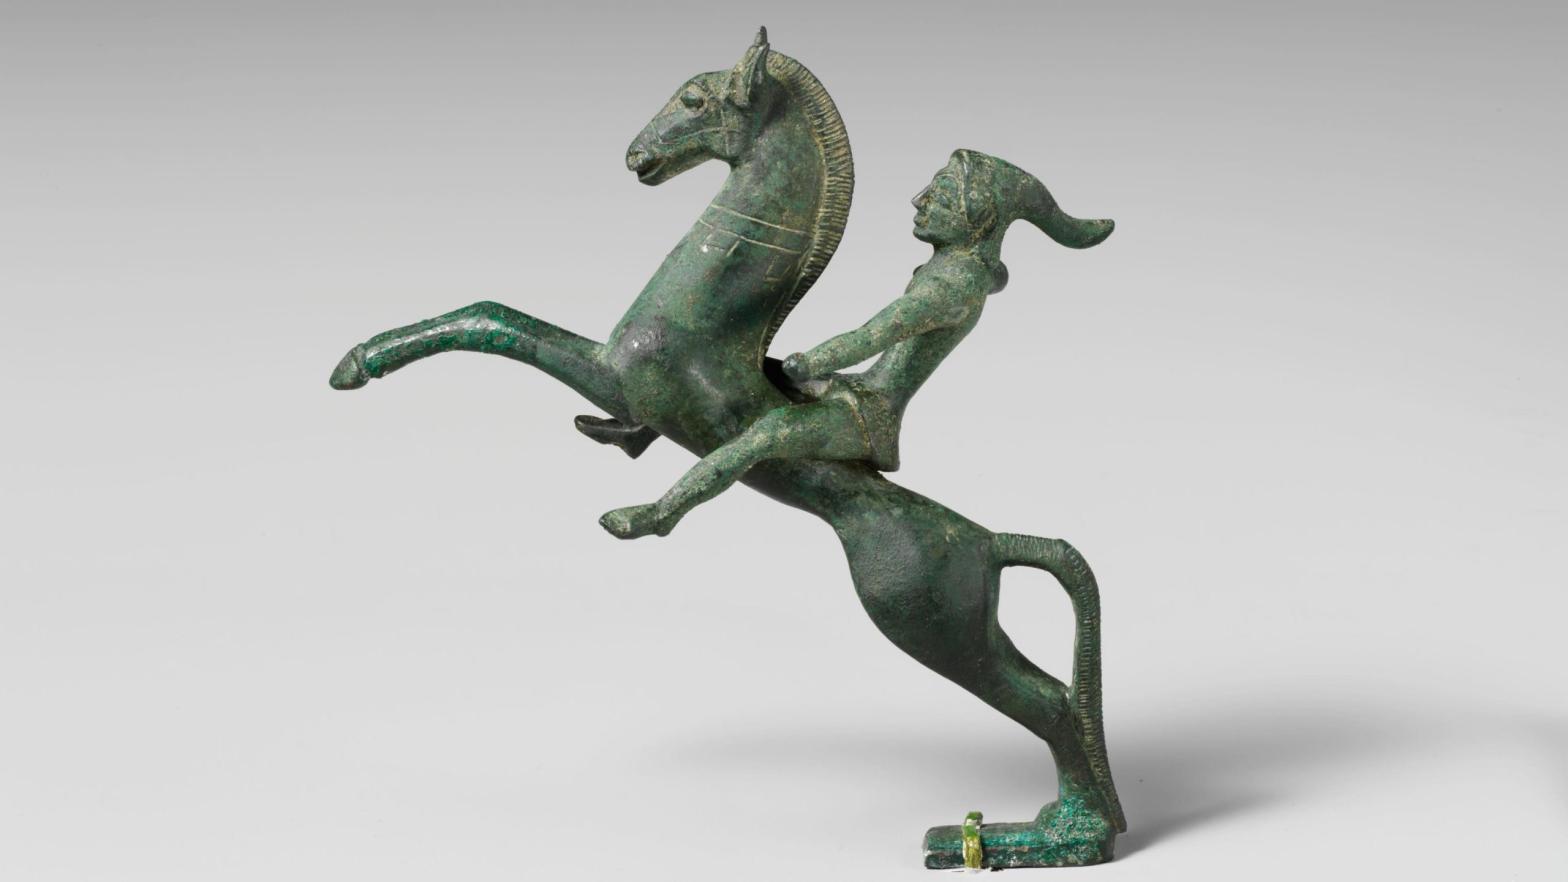 An Etruscan statue of a Scythian mounted archer from the early 5th century BCE. (Image: Metropolitan Museum of Art, Fair Use)